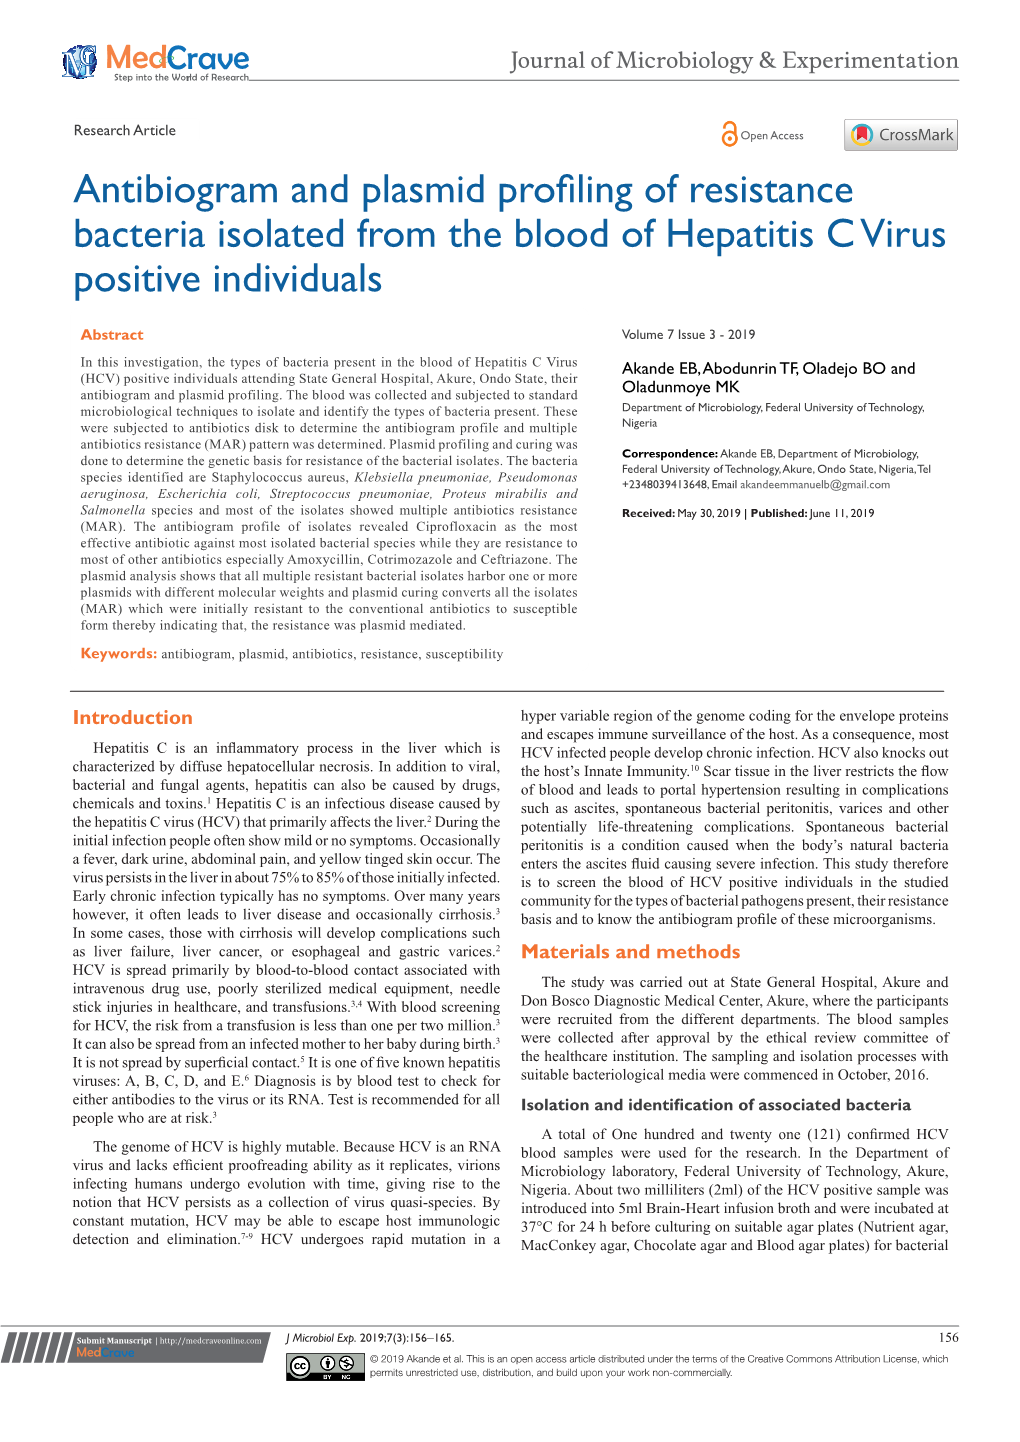 Antibiogram and Plasmid Profiling of Resistance Bacteria Isolated from the Blood of Hepatitis C Virus Positive Individuals